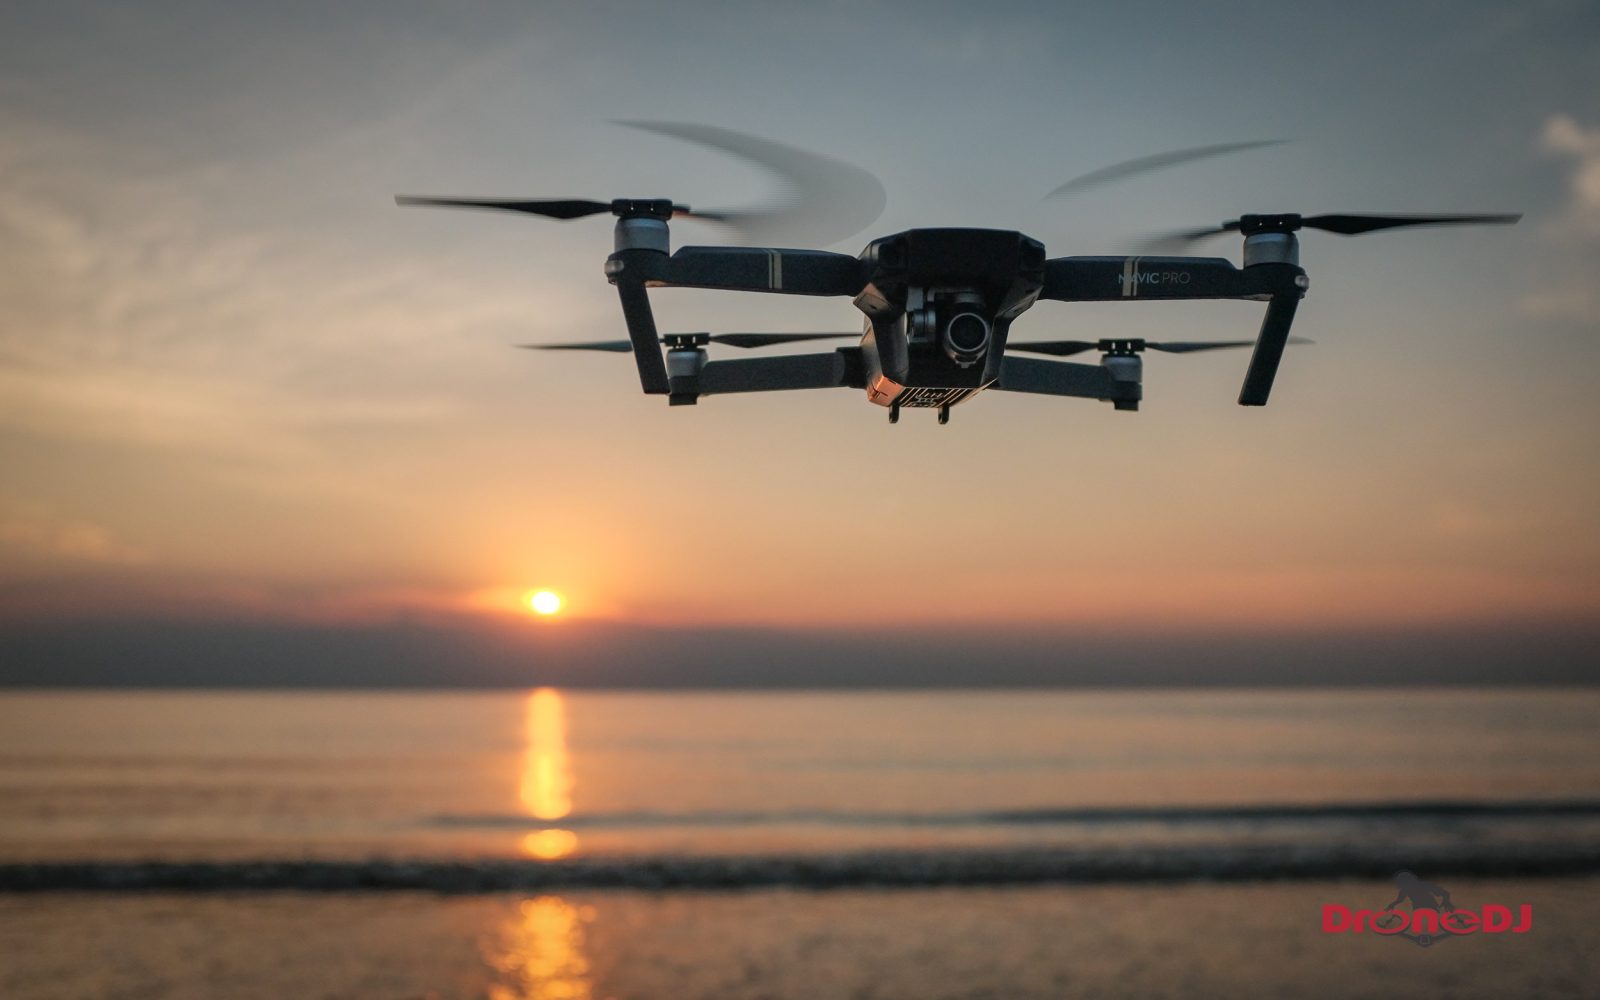 DroneDJ Review: The sun is setting on the world's favorite drone, the DJI Mavic Pro